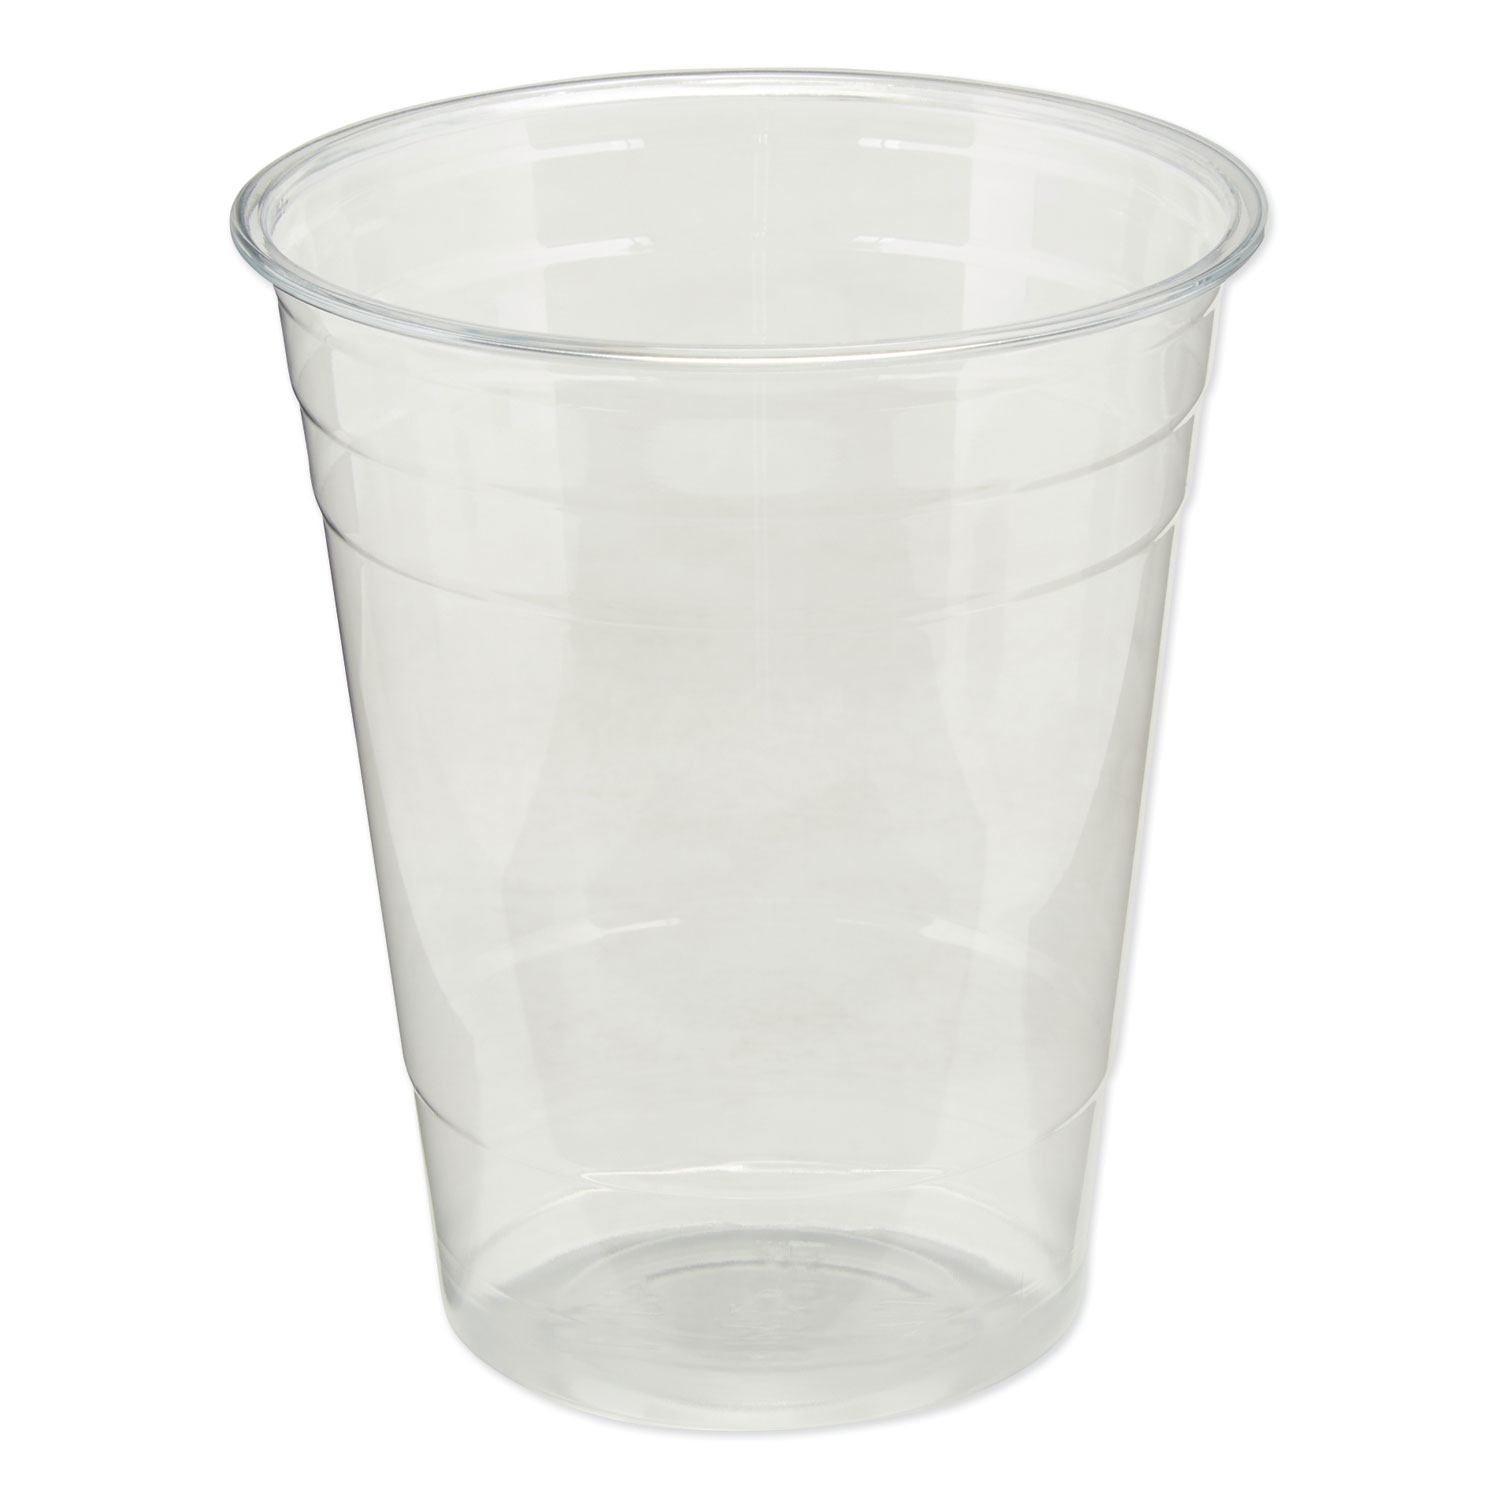  Dixie CPET16 Clear Plastic PETE Cups, Cold, 16oz, 50/Sleeve, 20 Sleeves/Carton (DXECPET16) 